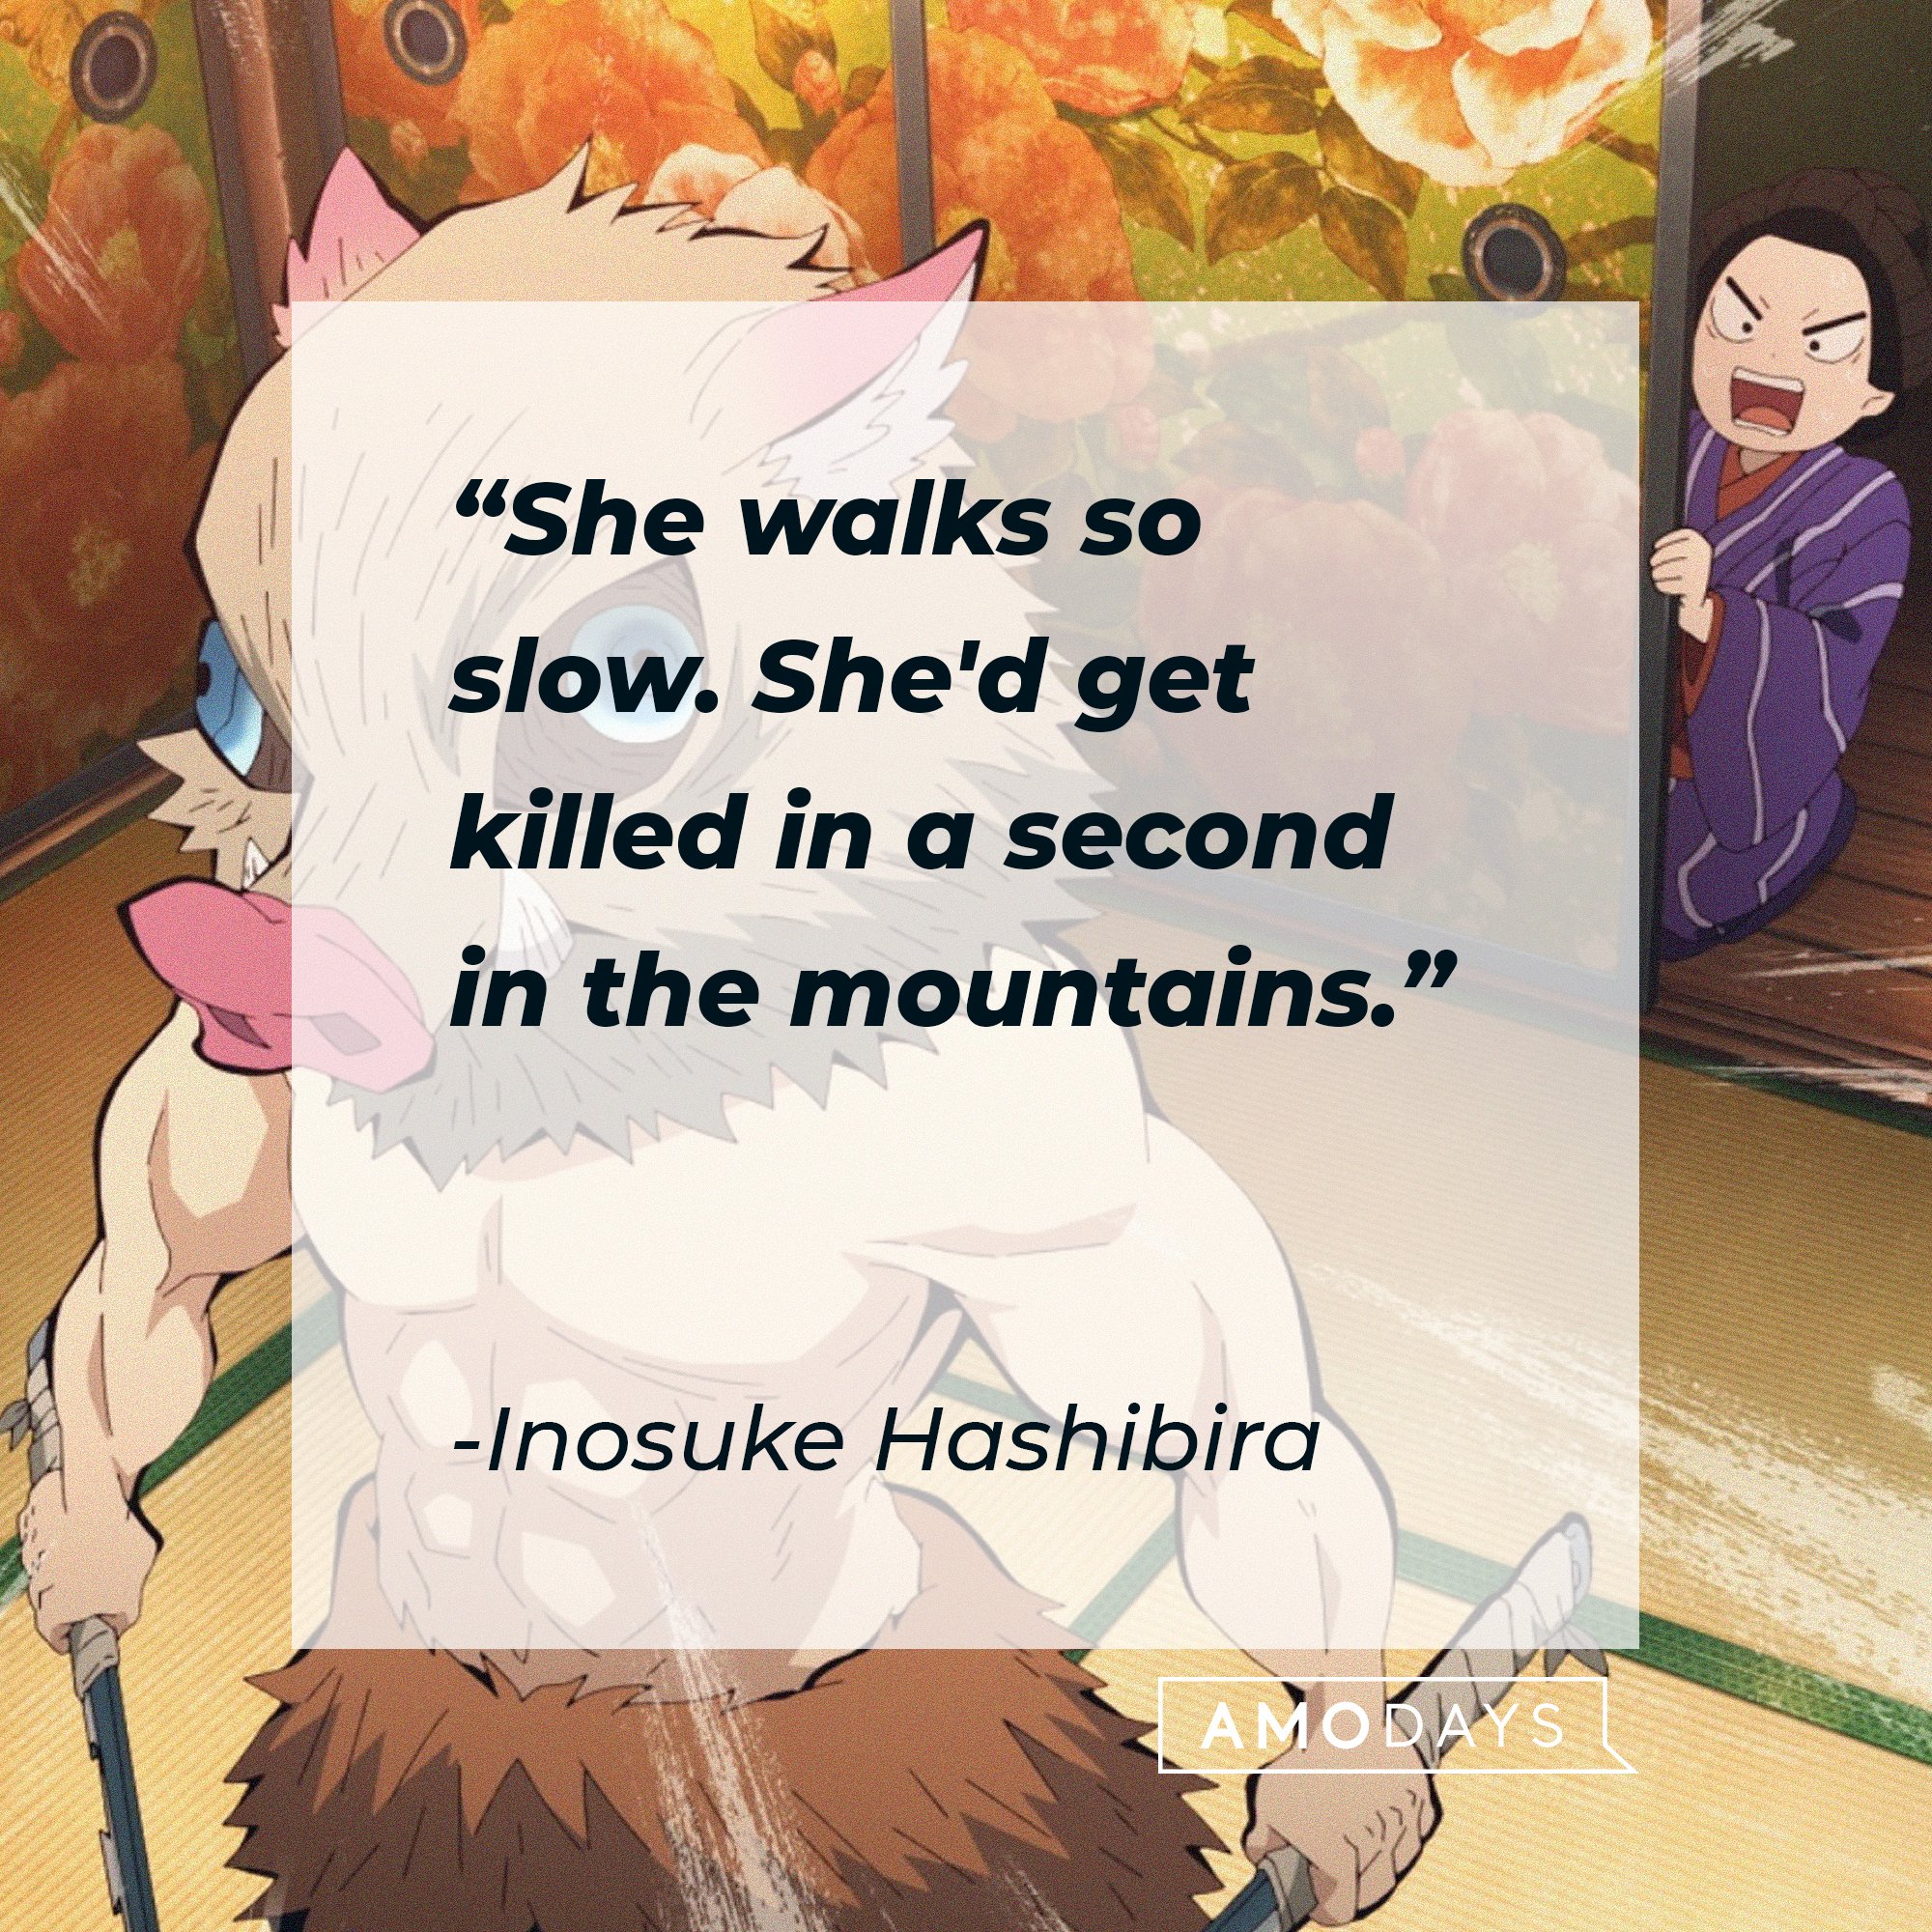  Inosuke Hashibira’s quote: "She walks so slow. She'd get killed in a second in the mountains." | Image: AmoDays